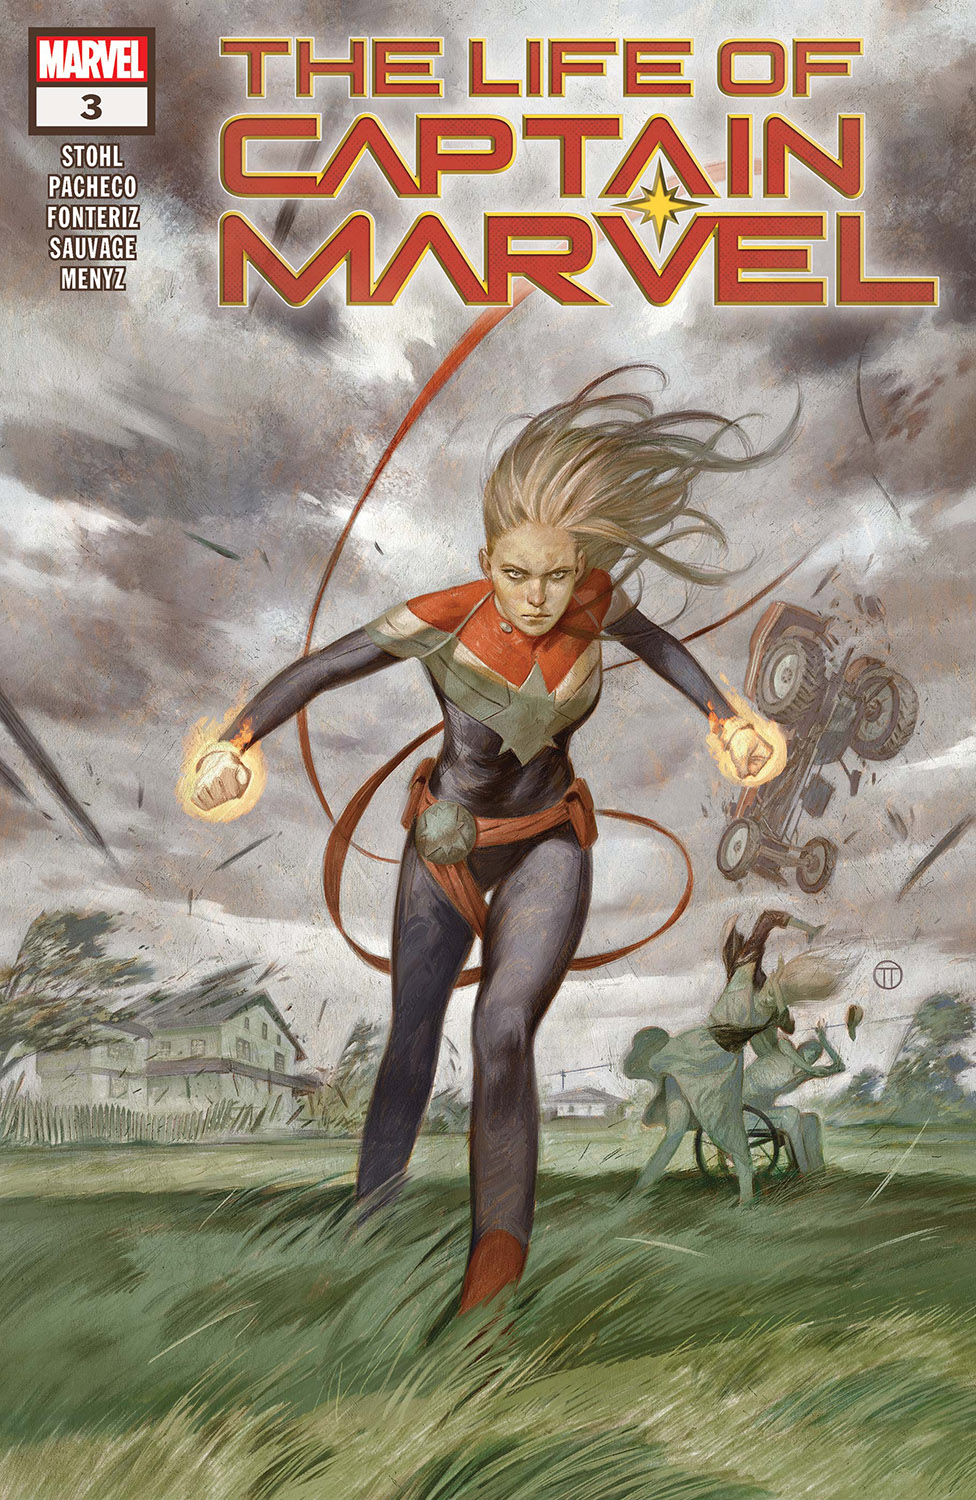 The Life of Captain Marvel (2018) #3